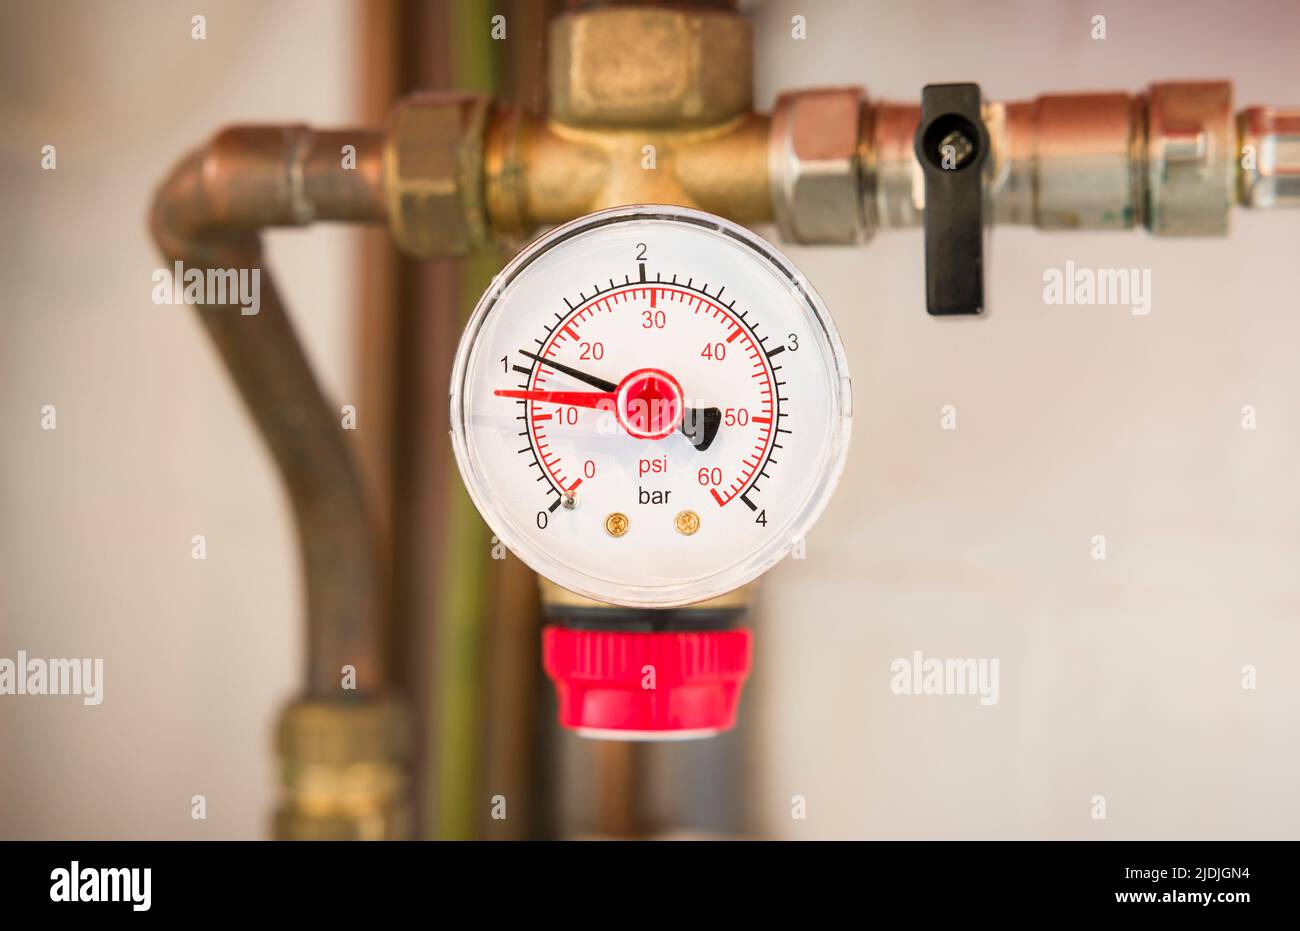 Pressure gauge on a sealed central heating system in a UK home Stock Photo